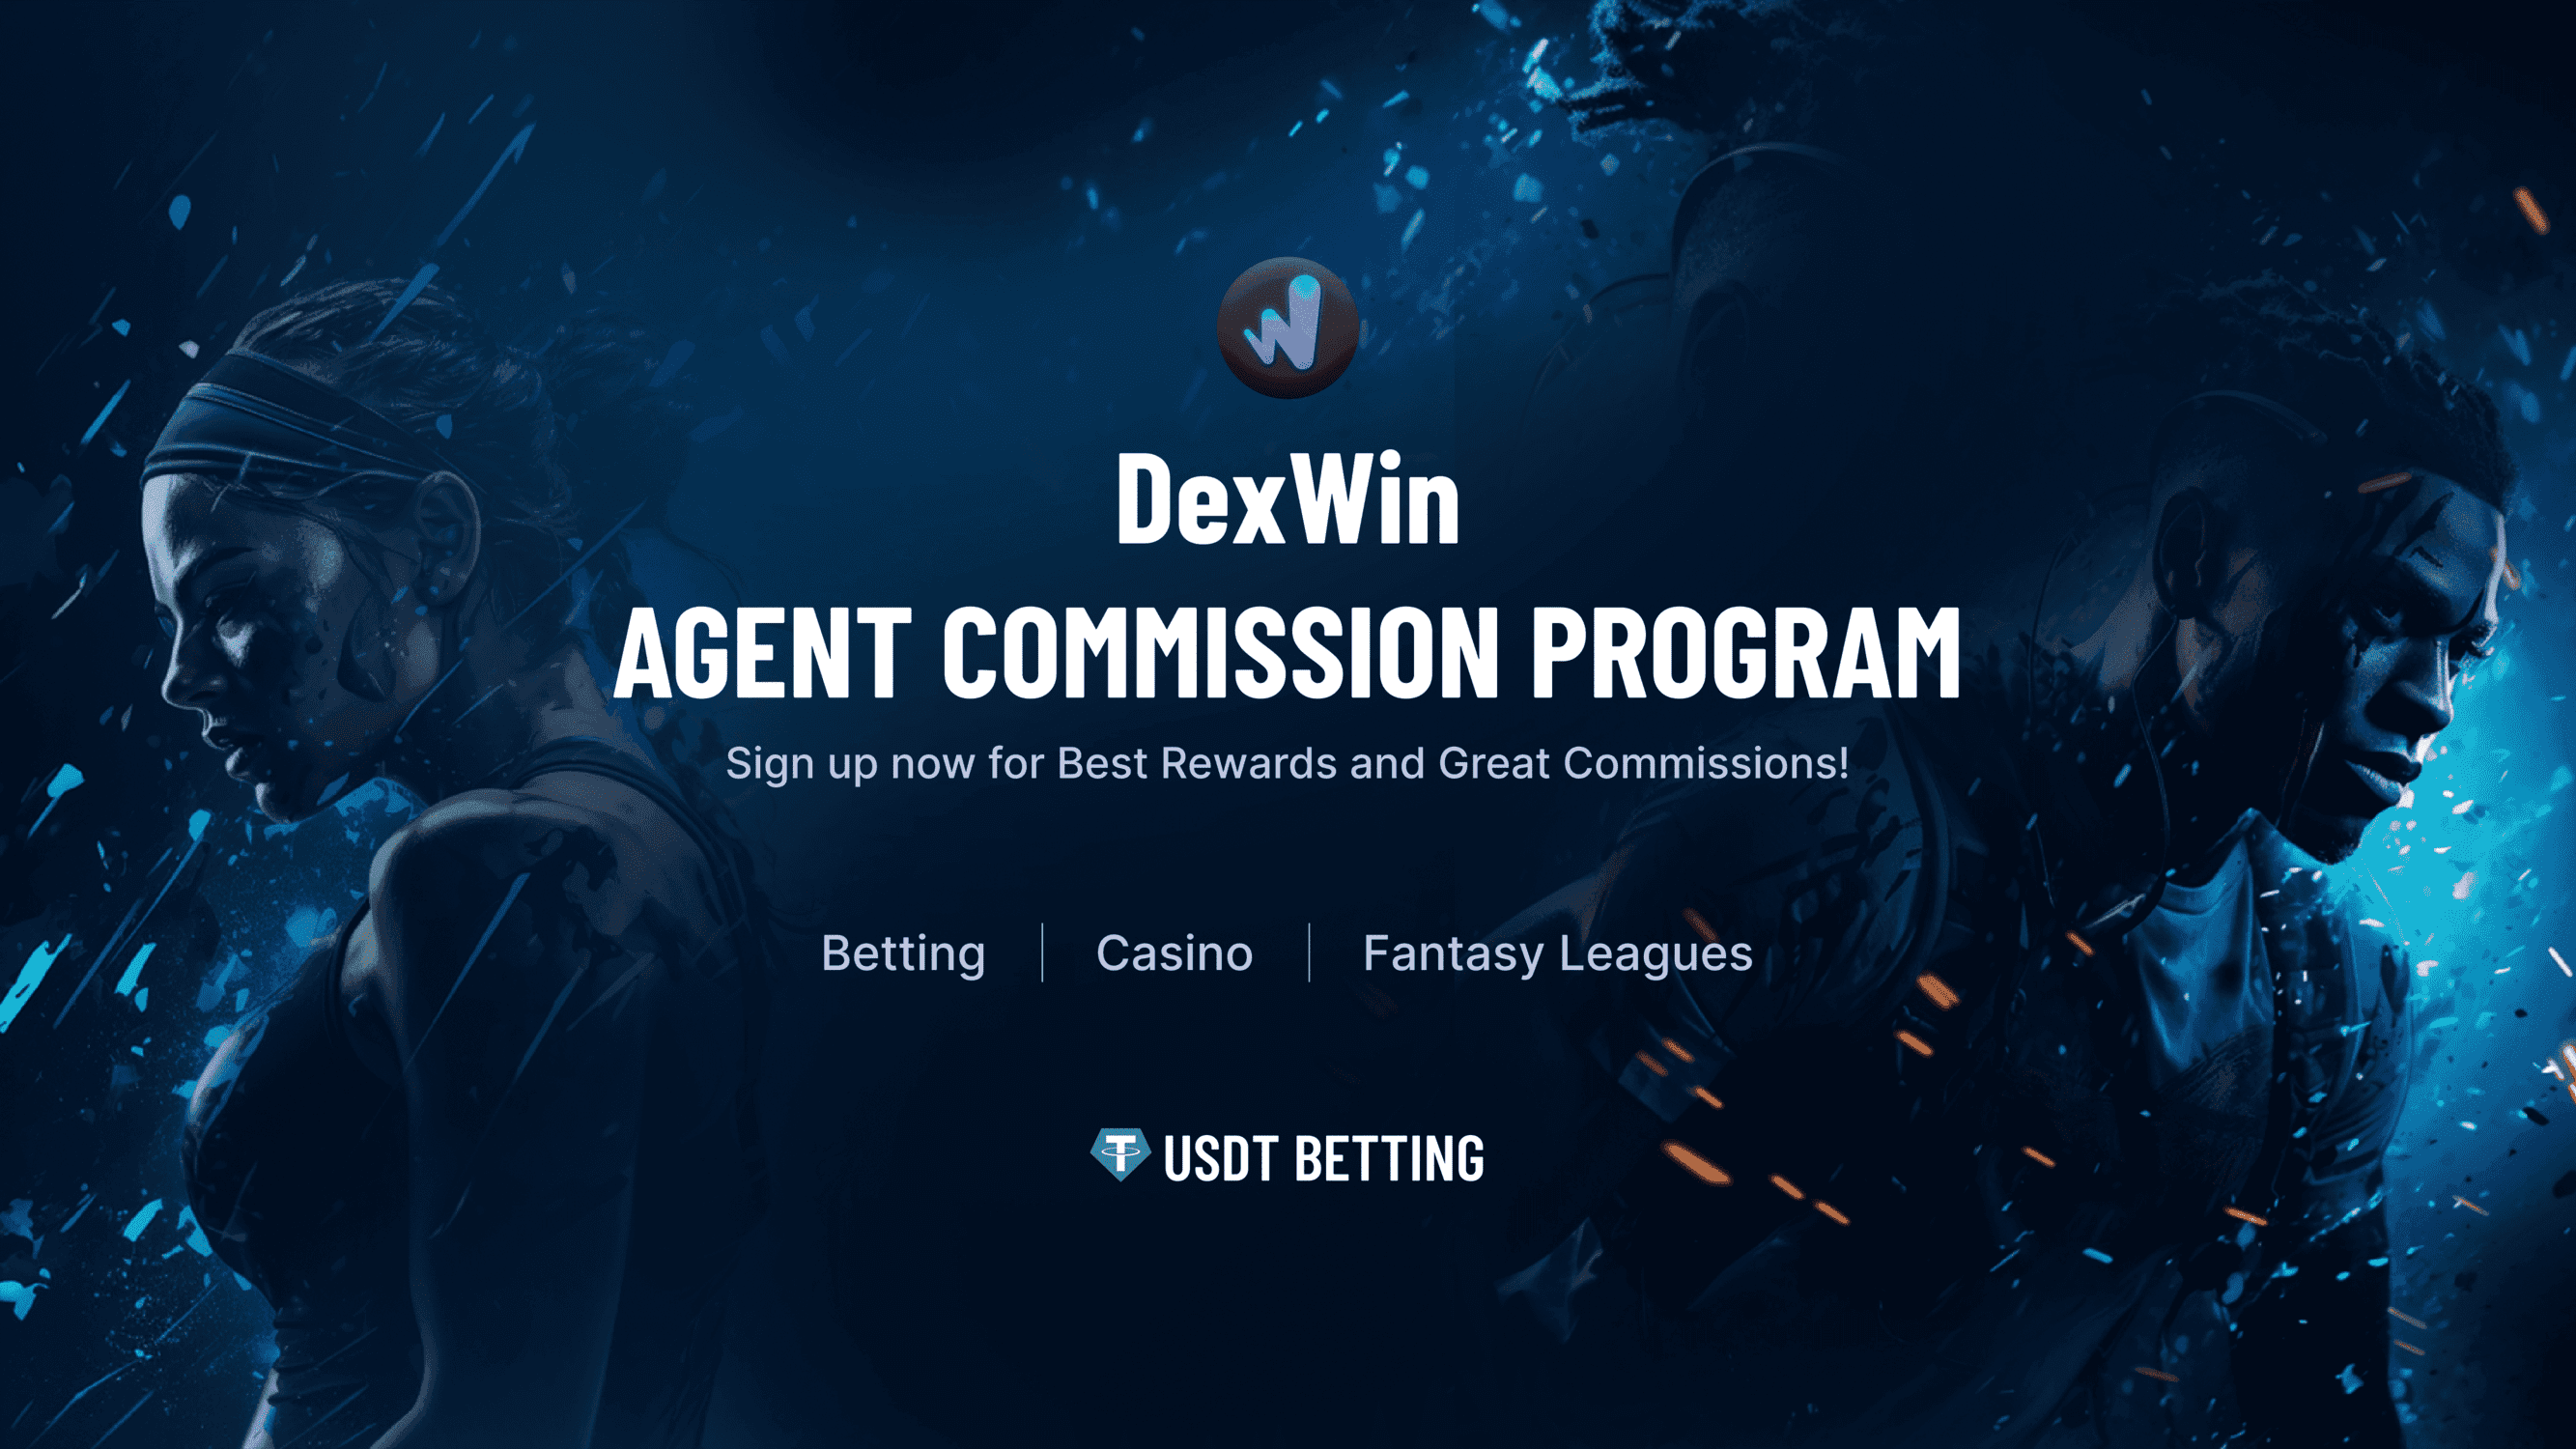 DexWin AGENT COMMISSION PROGRAM Sign up now for Best Rewards and Great Commissions! Betting Casino Fantasy Leagues usdt betting